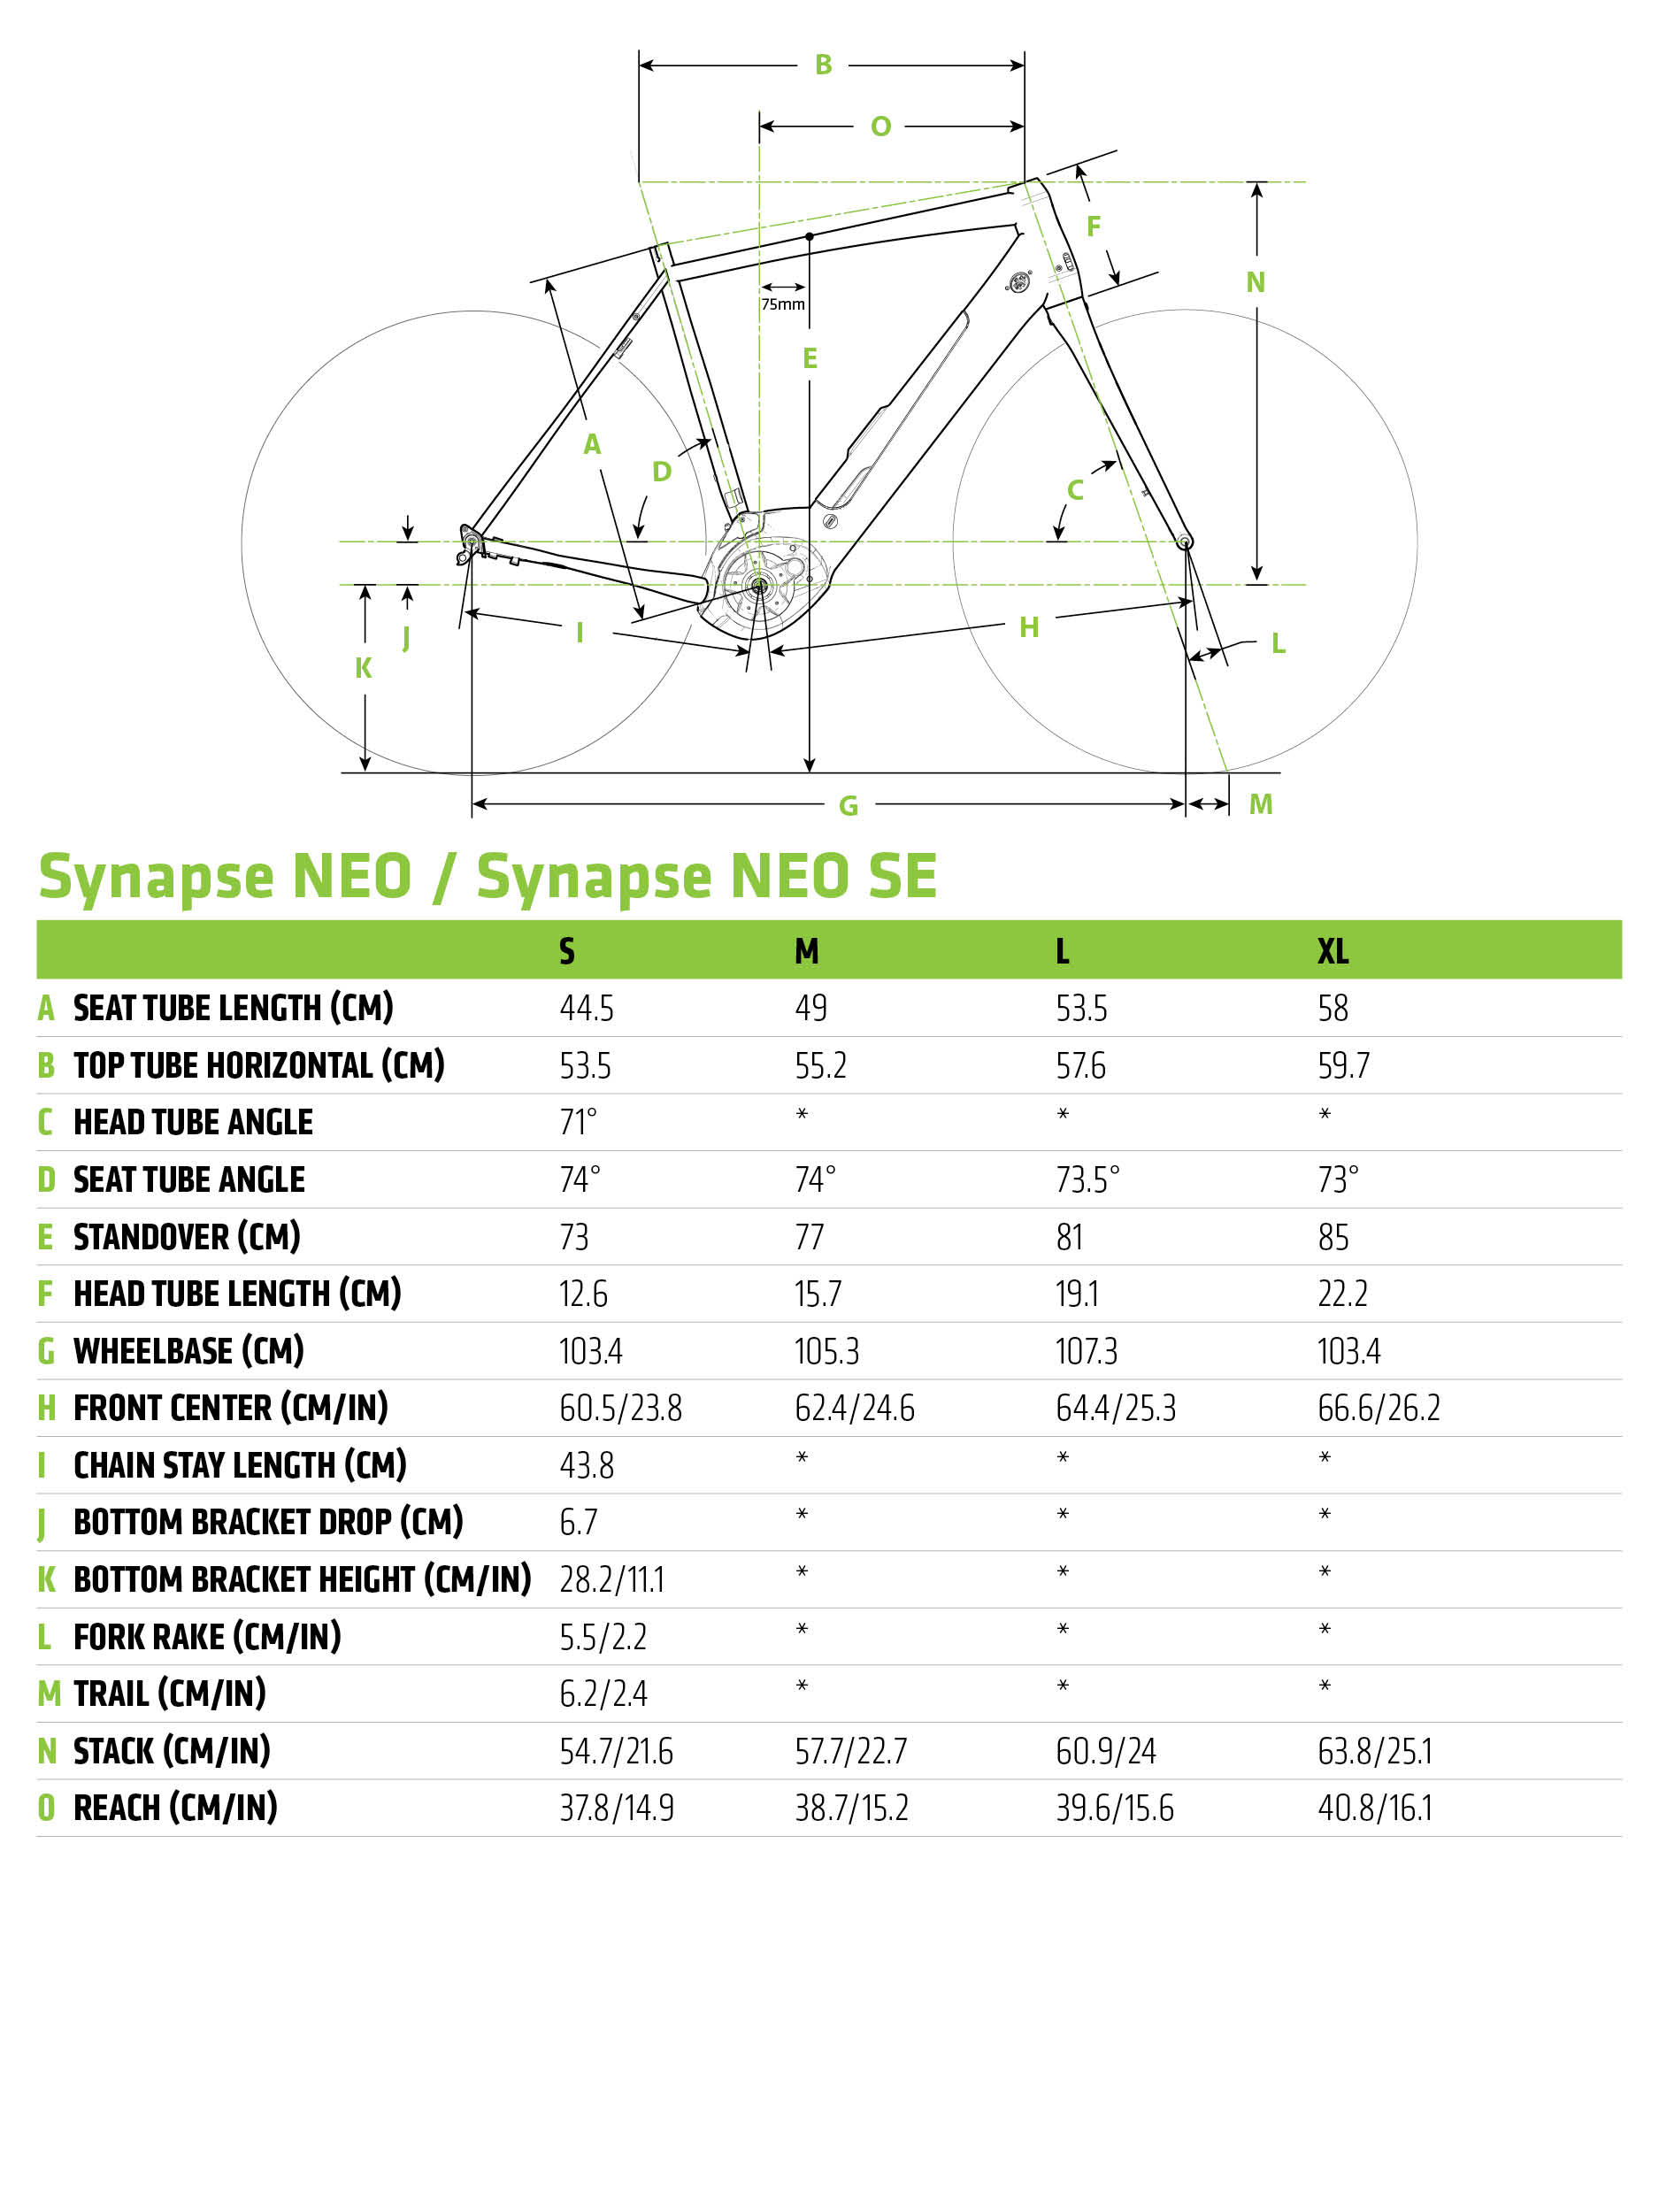 Canondale Synapse Neo 1 geometry chart